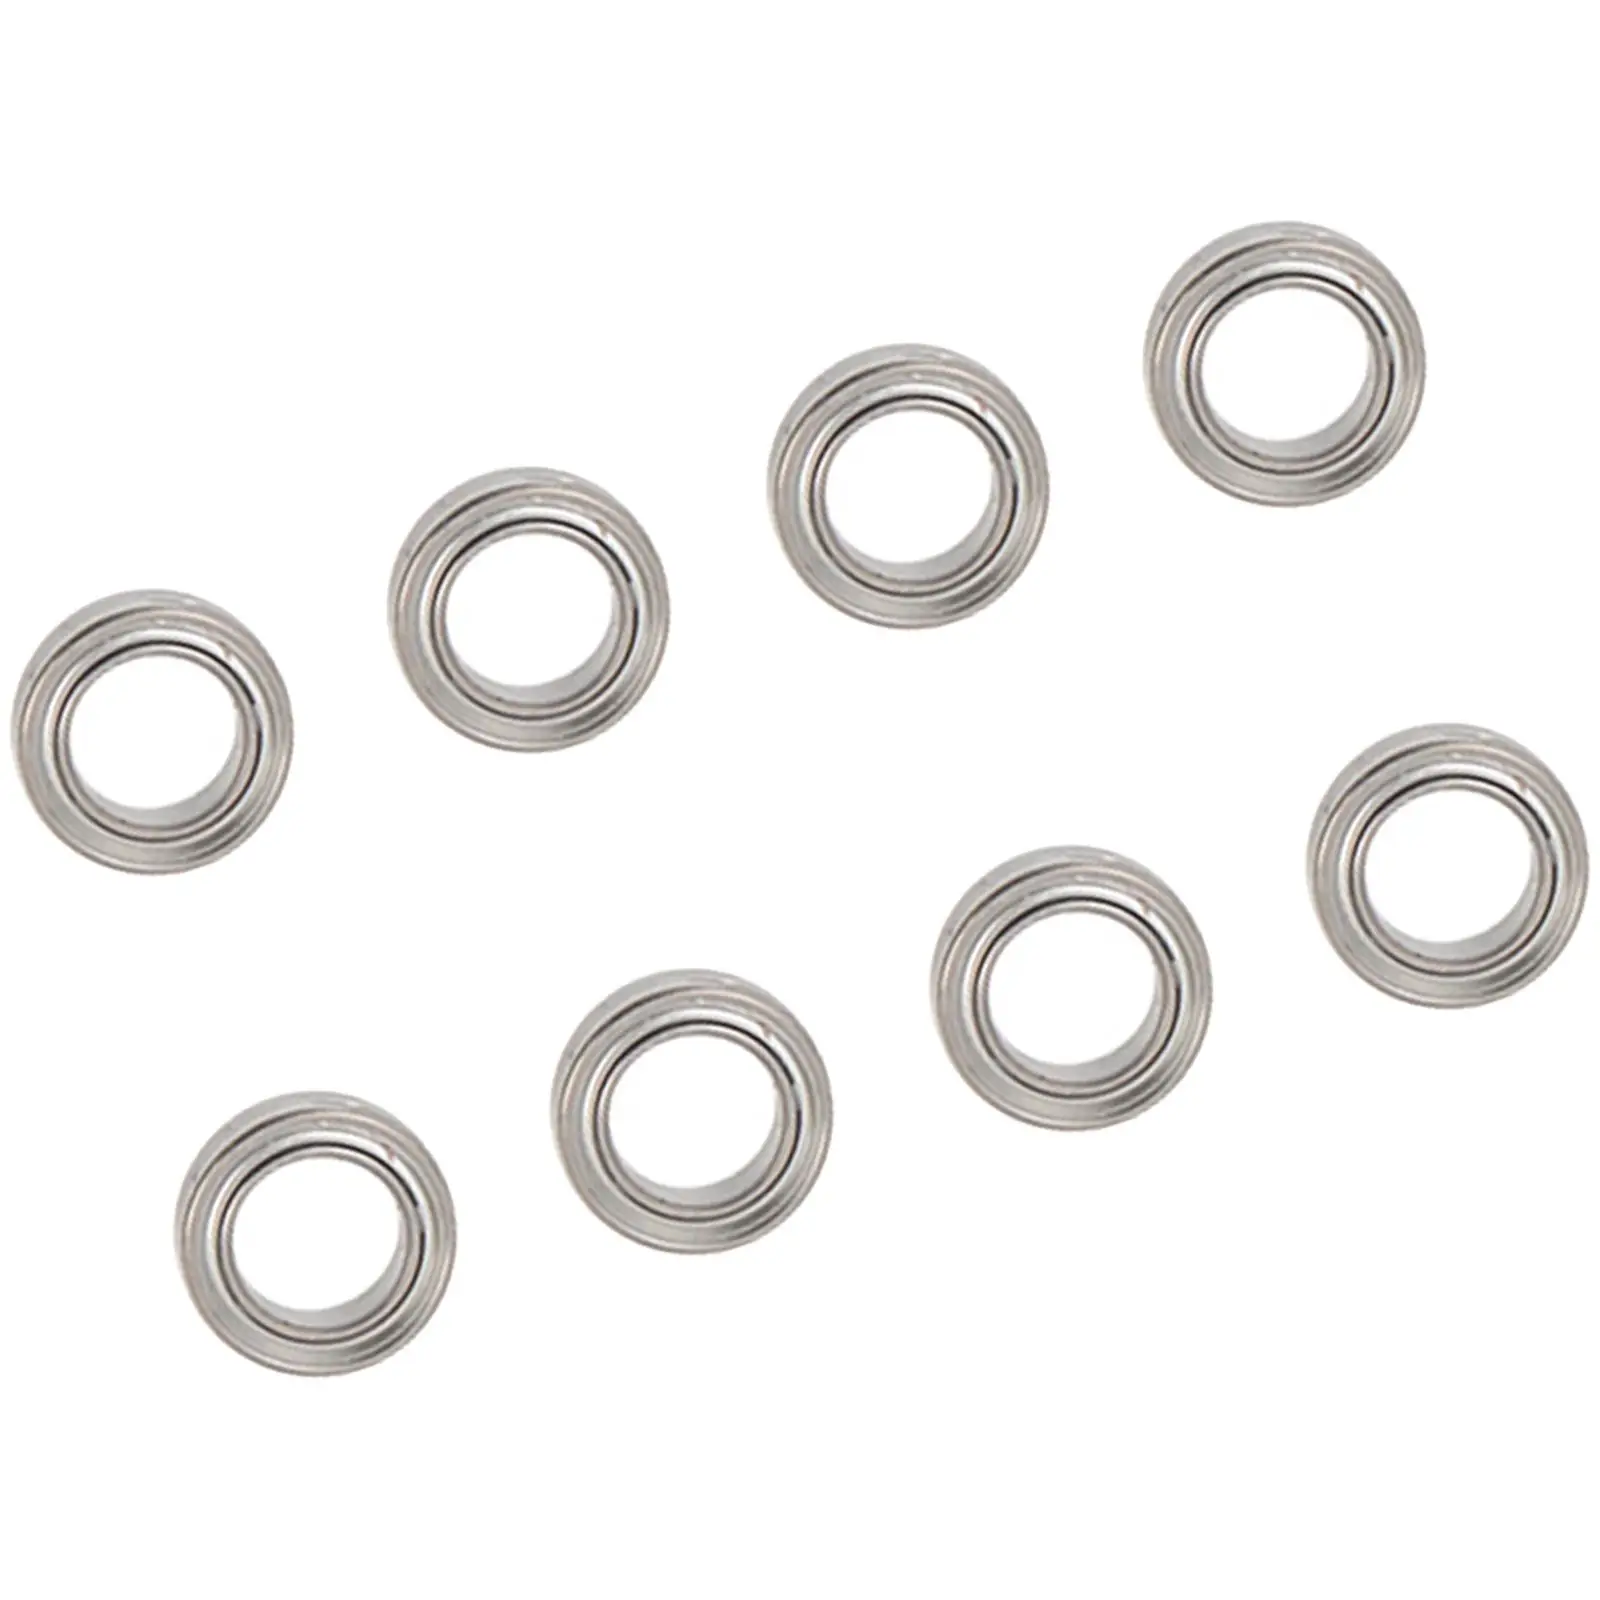 

8x 1/18 Steering Cup Bearing Sturdy RC RC Car Spare Parts Replace for A01 A02 A86 1802,1803 Ld1801 DIY Accessory RC Car Model